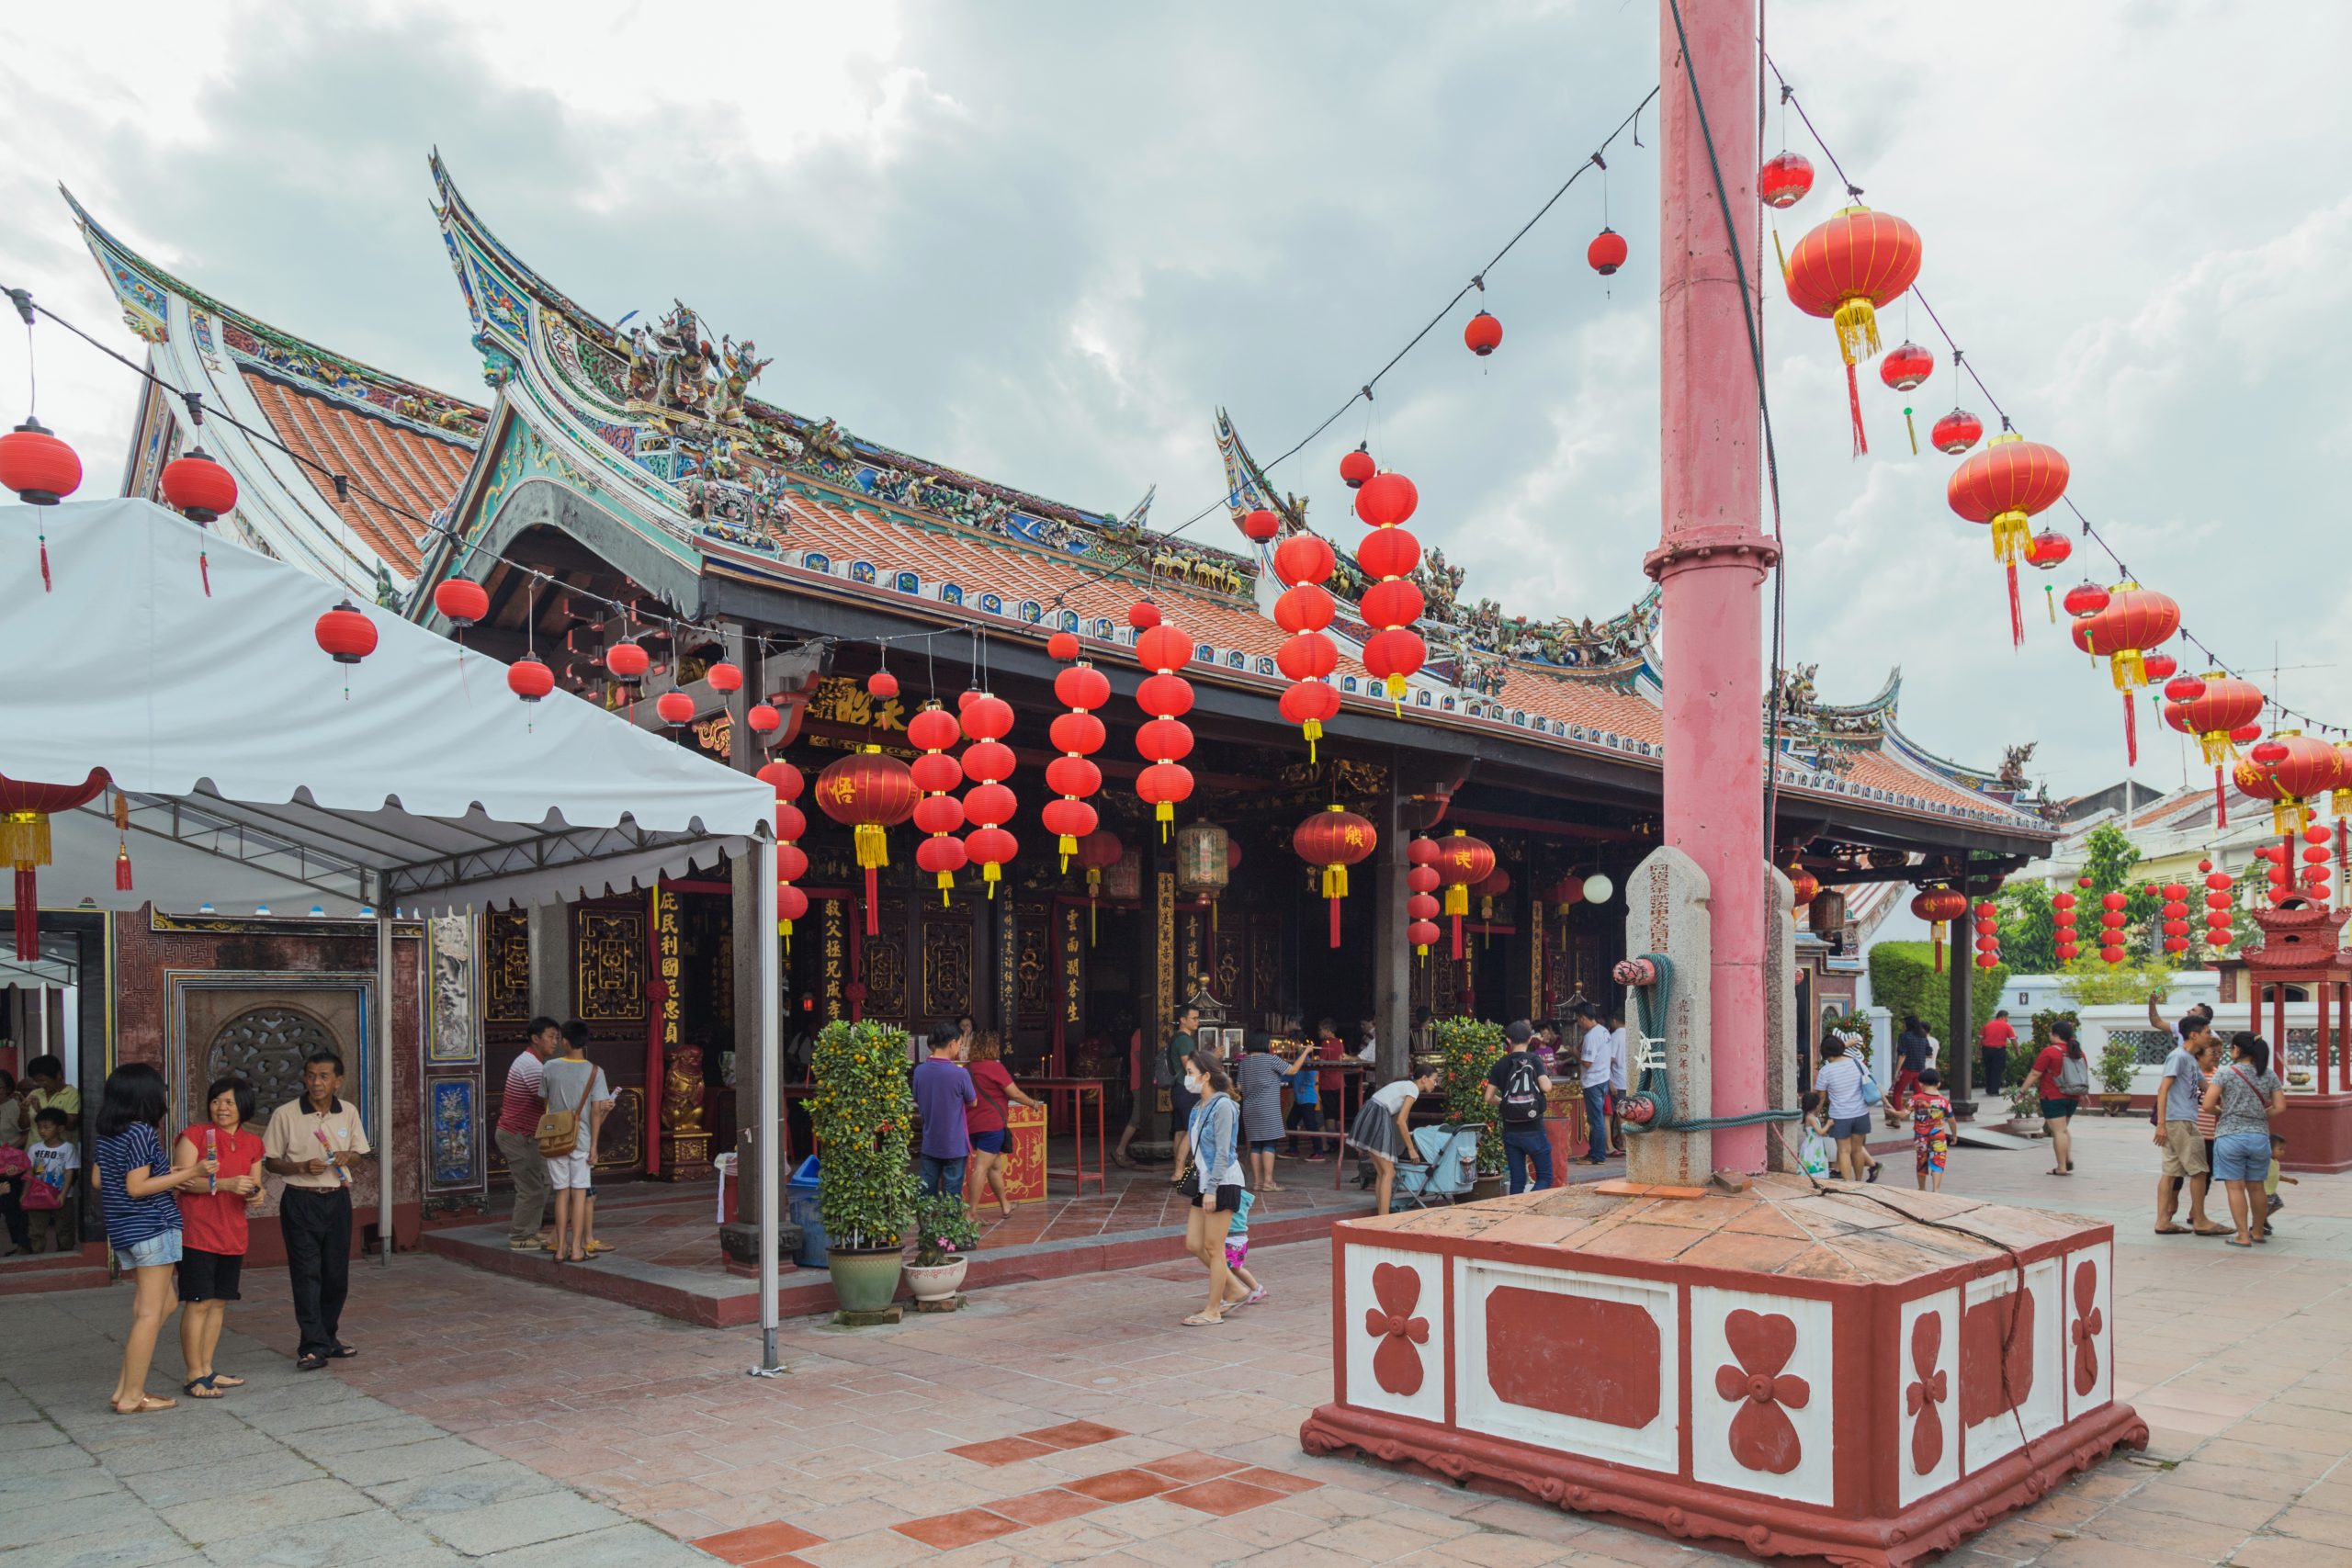 Cheng Hoon Teng Temple - A Timeless Tapestry of Harmony in Malacca, Malaysia